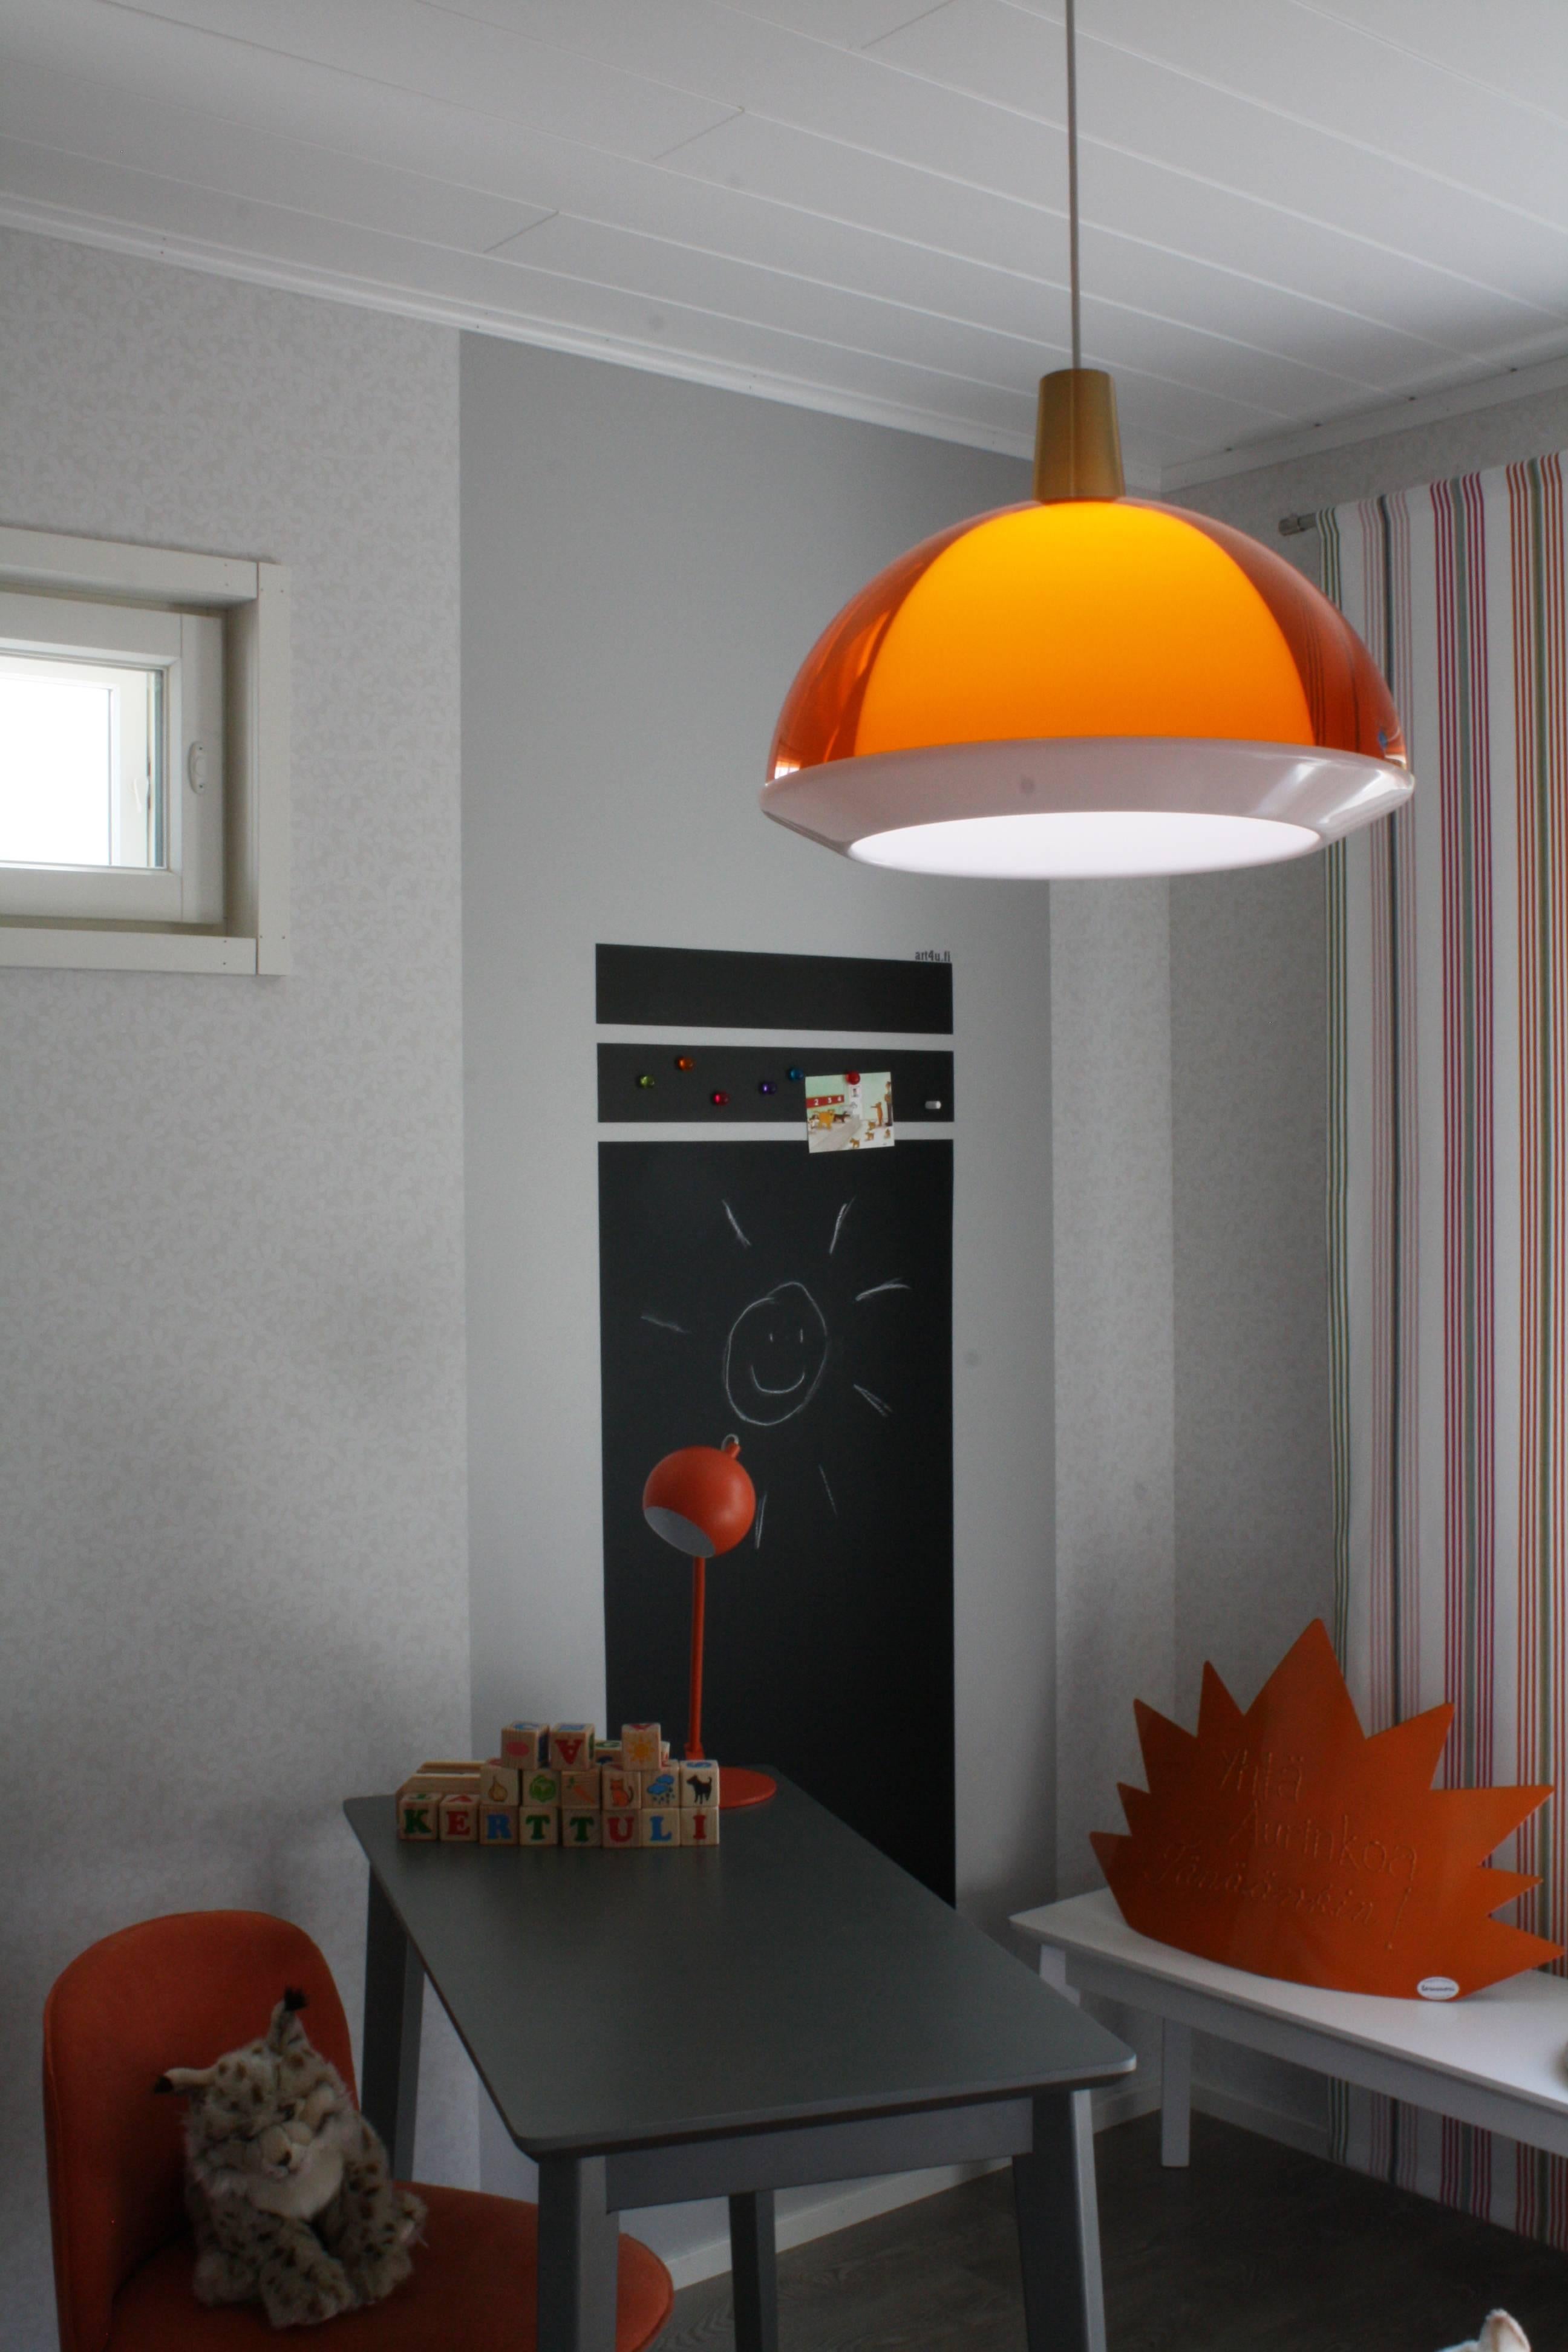 Yki Nummi orange 'Kuplat' pendant for Innolux Oy, Finland. Designed in 1959, Nummi's iconic light consists of two acrylic shades of different colors, one nesting inside the other. The name Kuplat means bubbles in Finnish. As Nummi once astutely